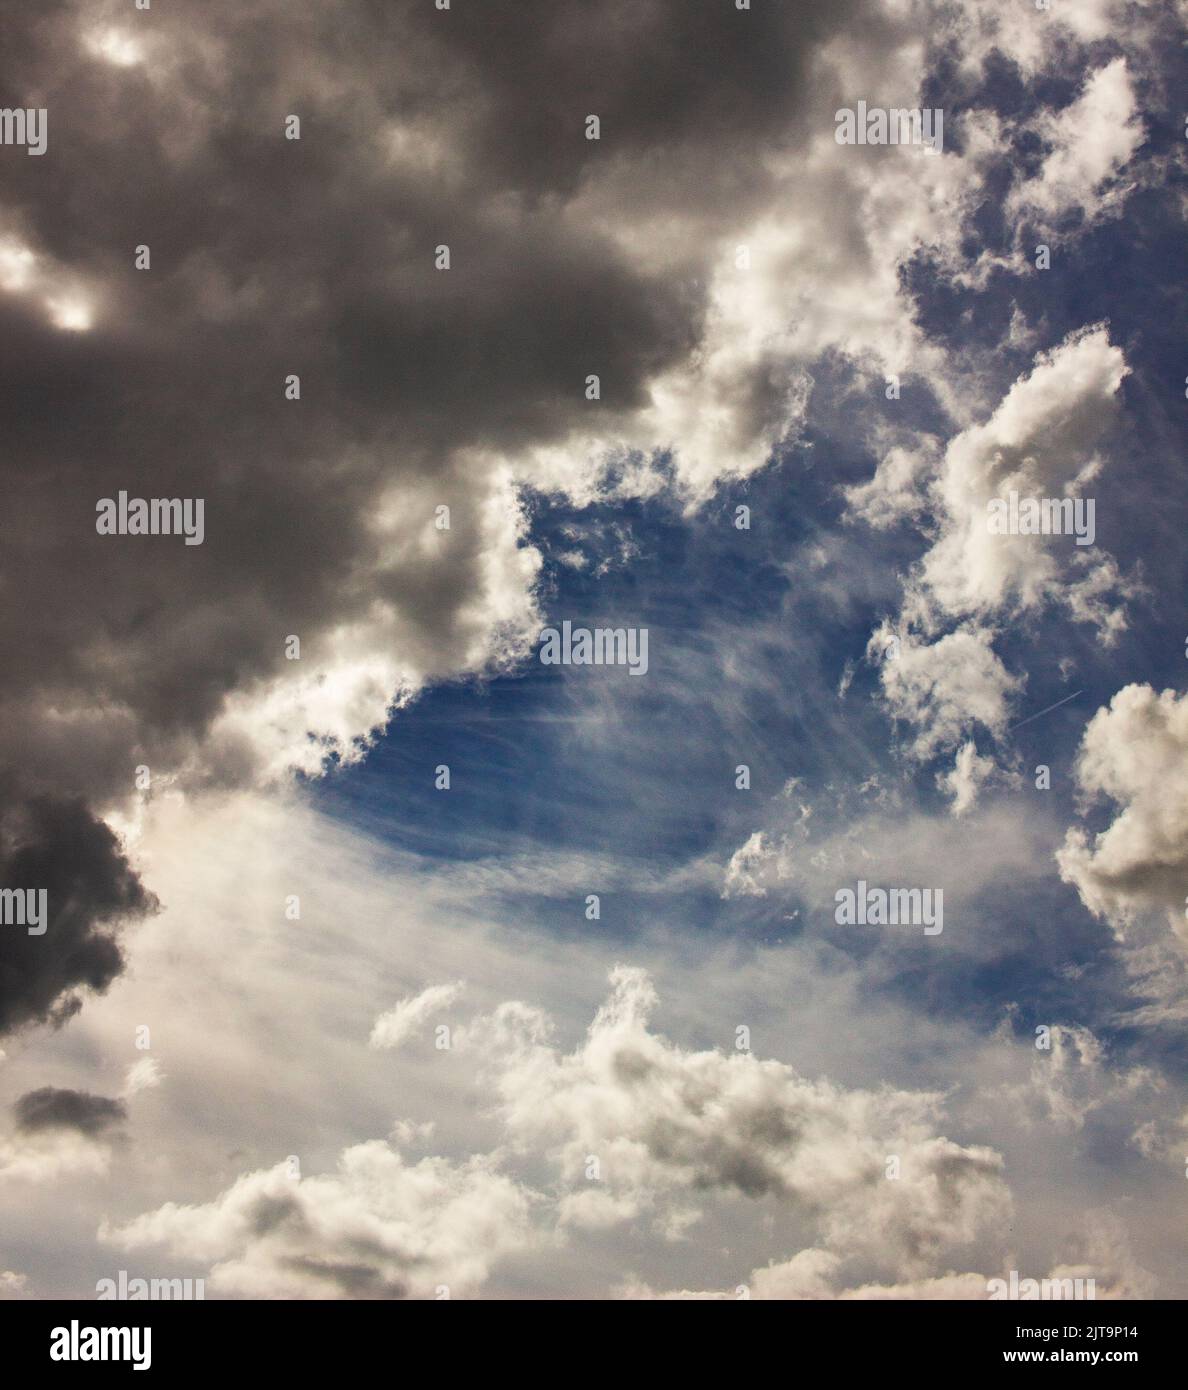 Dramatic storm clouds against a blue sky Stock Photo